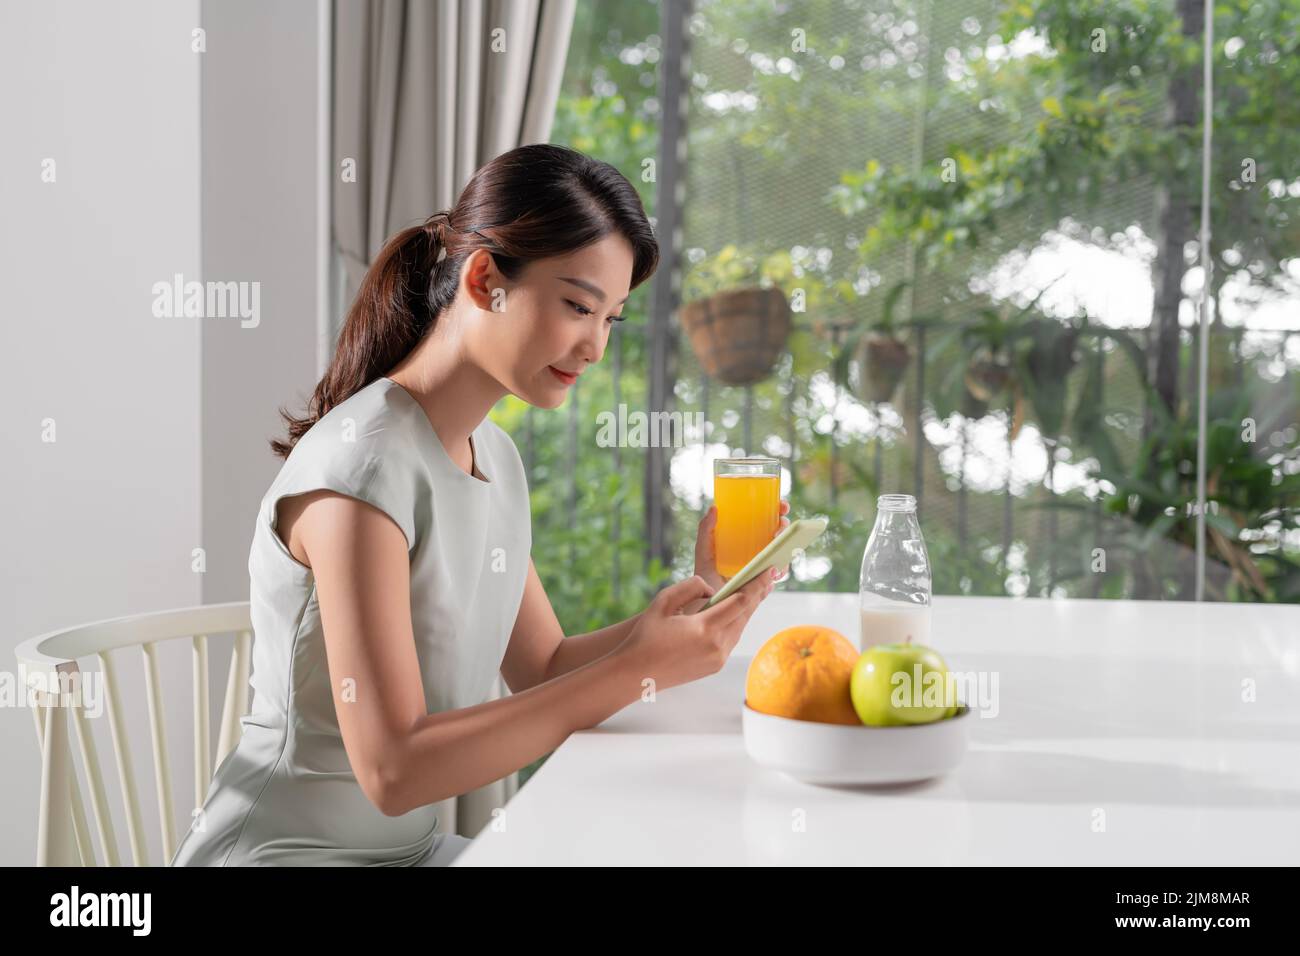 Smiling pretty woman looking at mobile phone and holding glass of orange juice while having breakfast Stock Photo